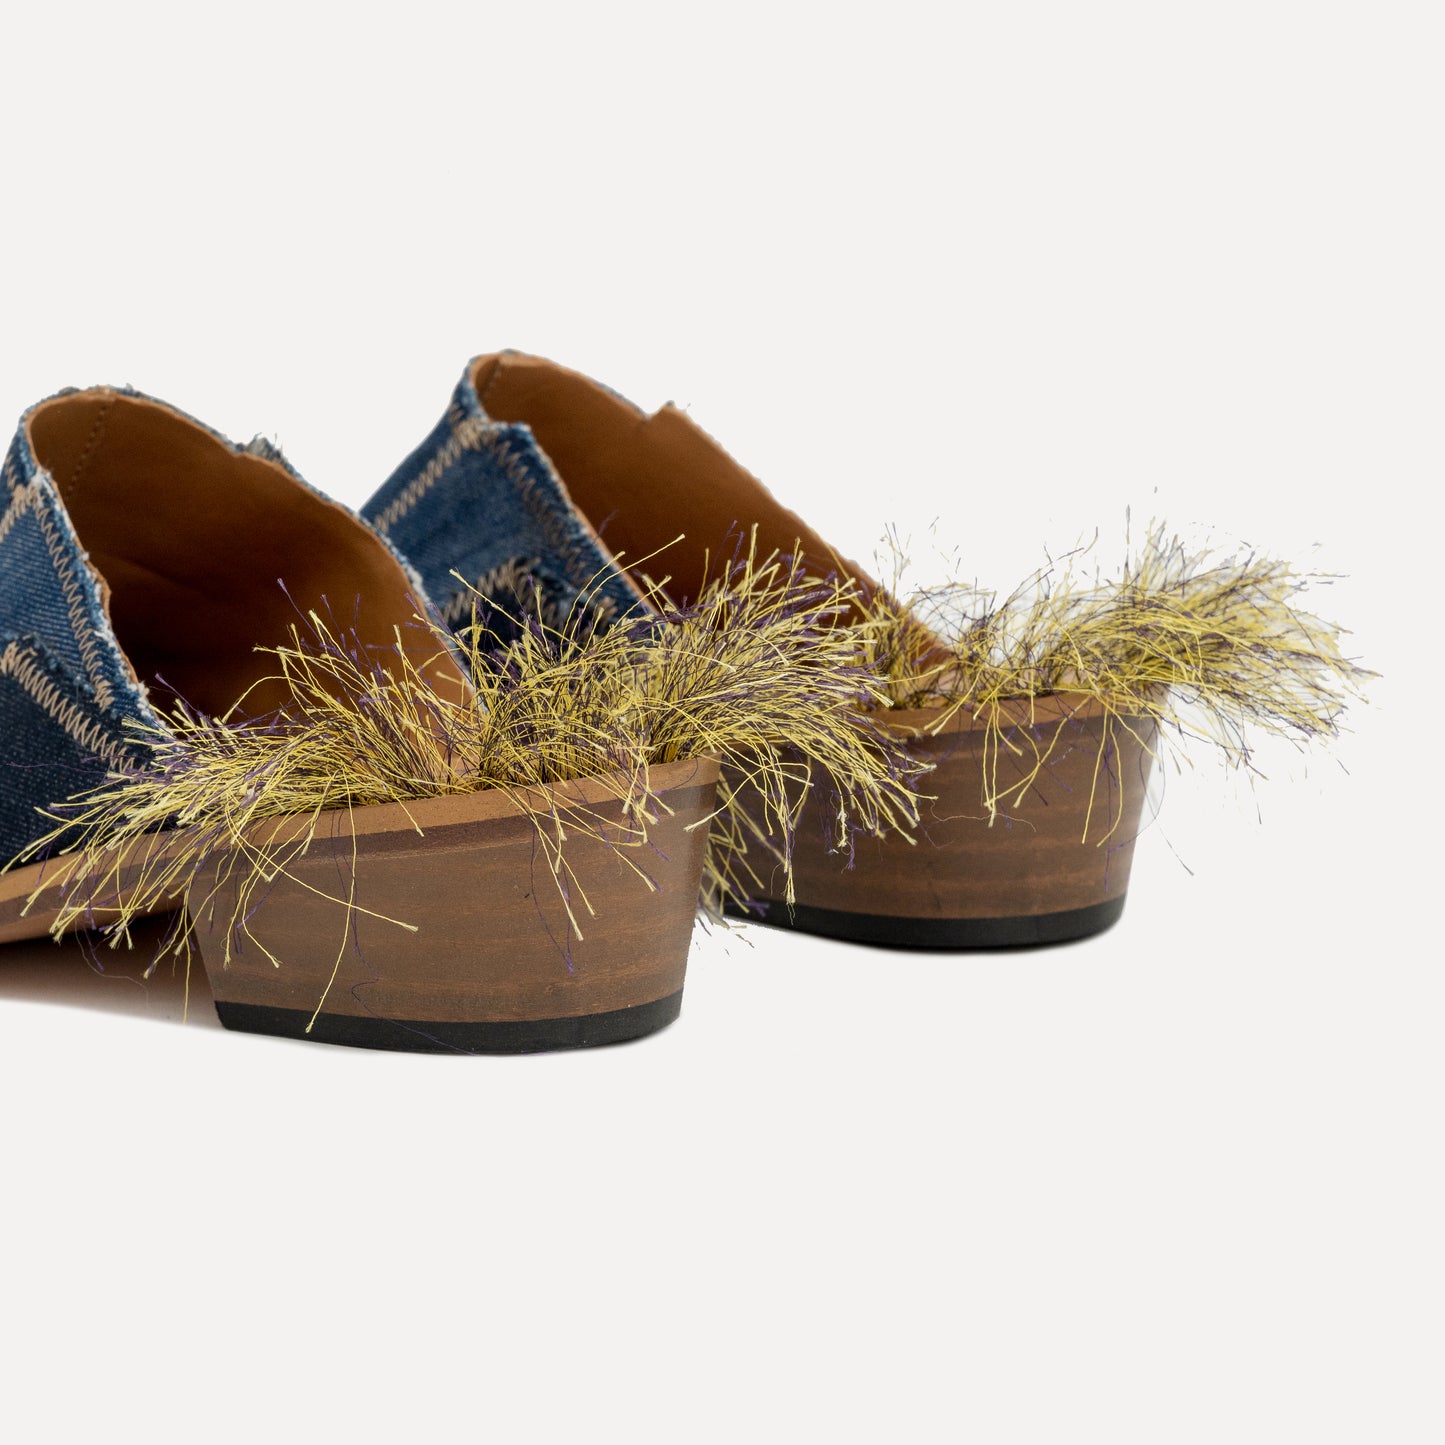 Penude - denim mules with colored thread on the heel